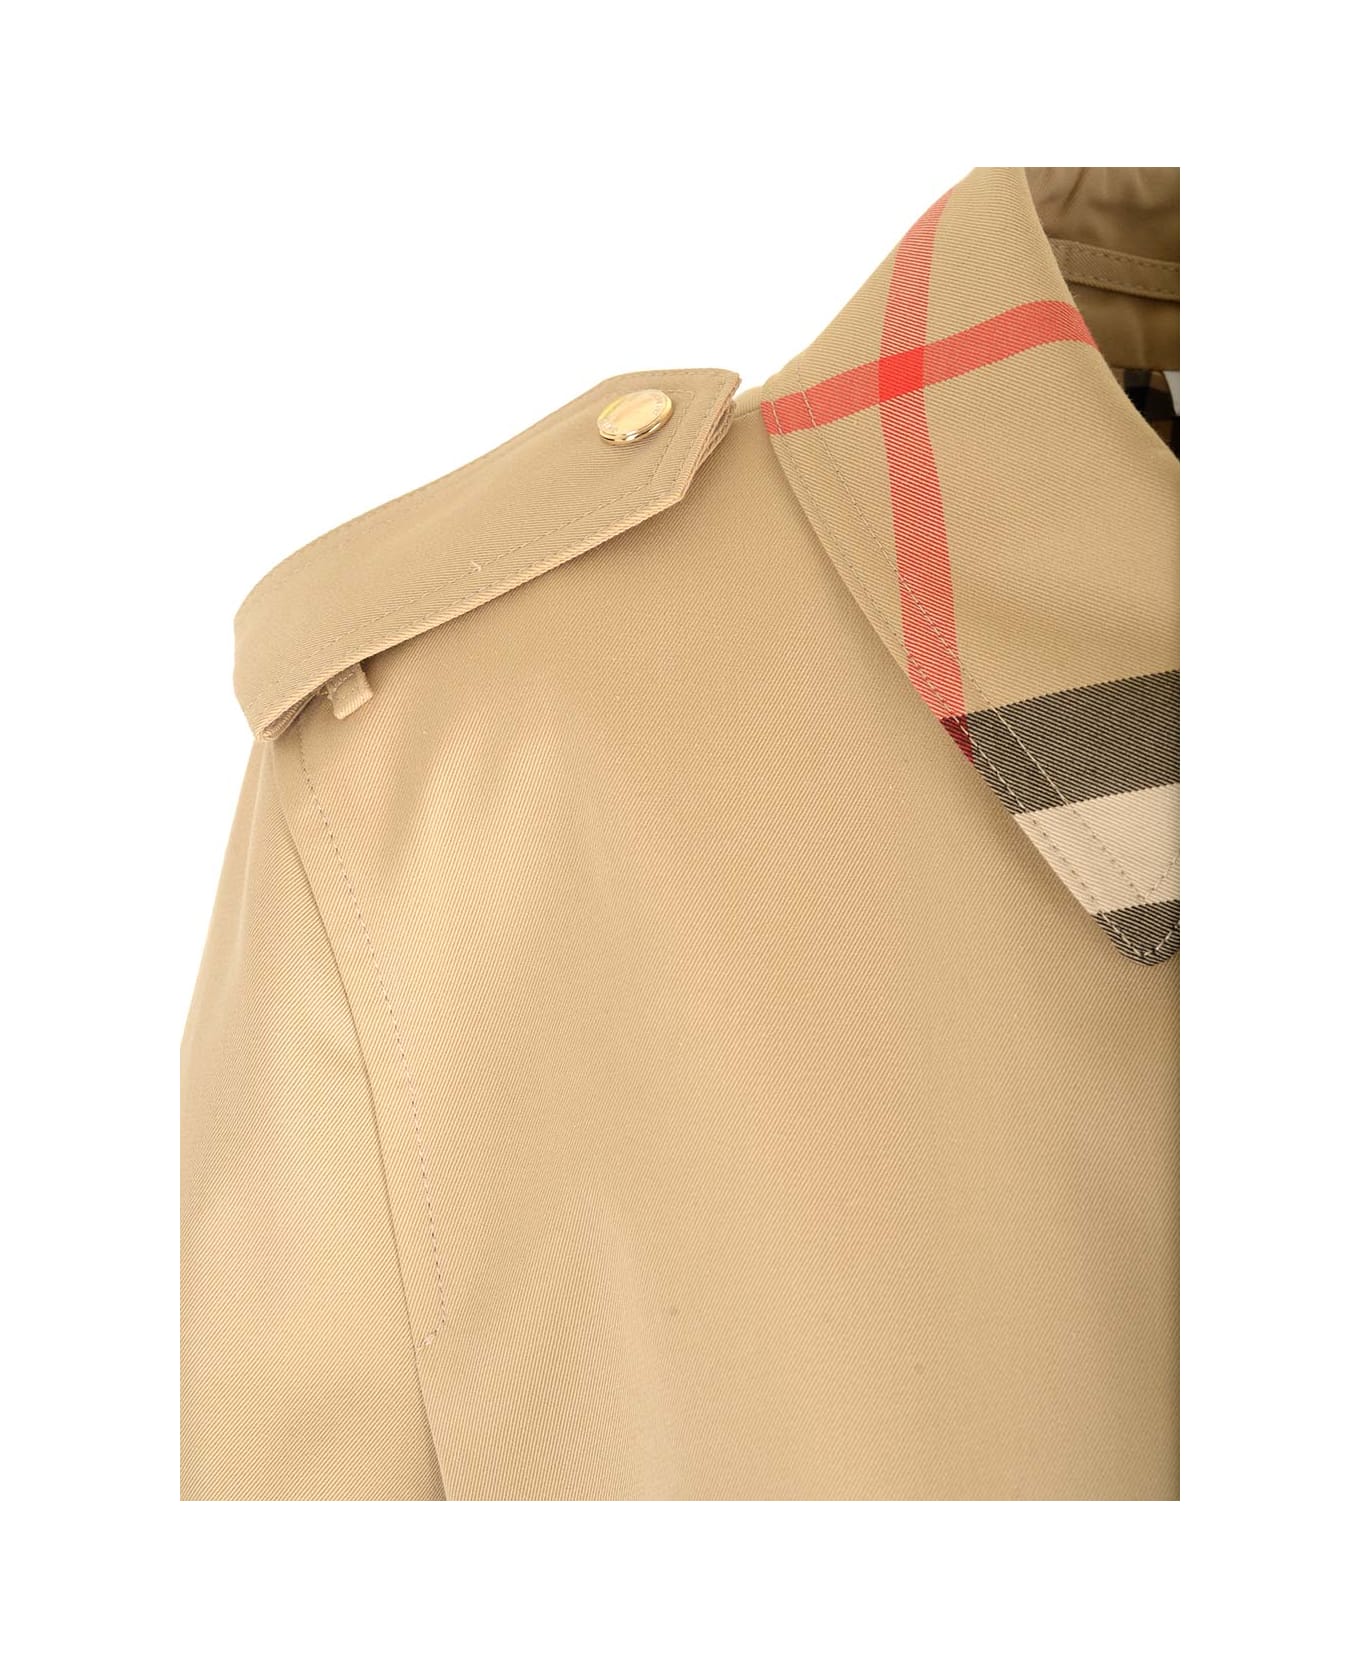 Burberry Honey Trench Coat With Check Collar - Beige